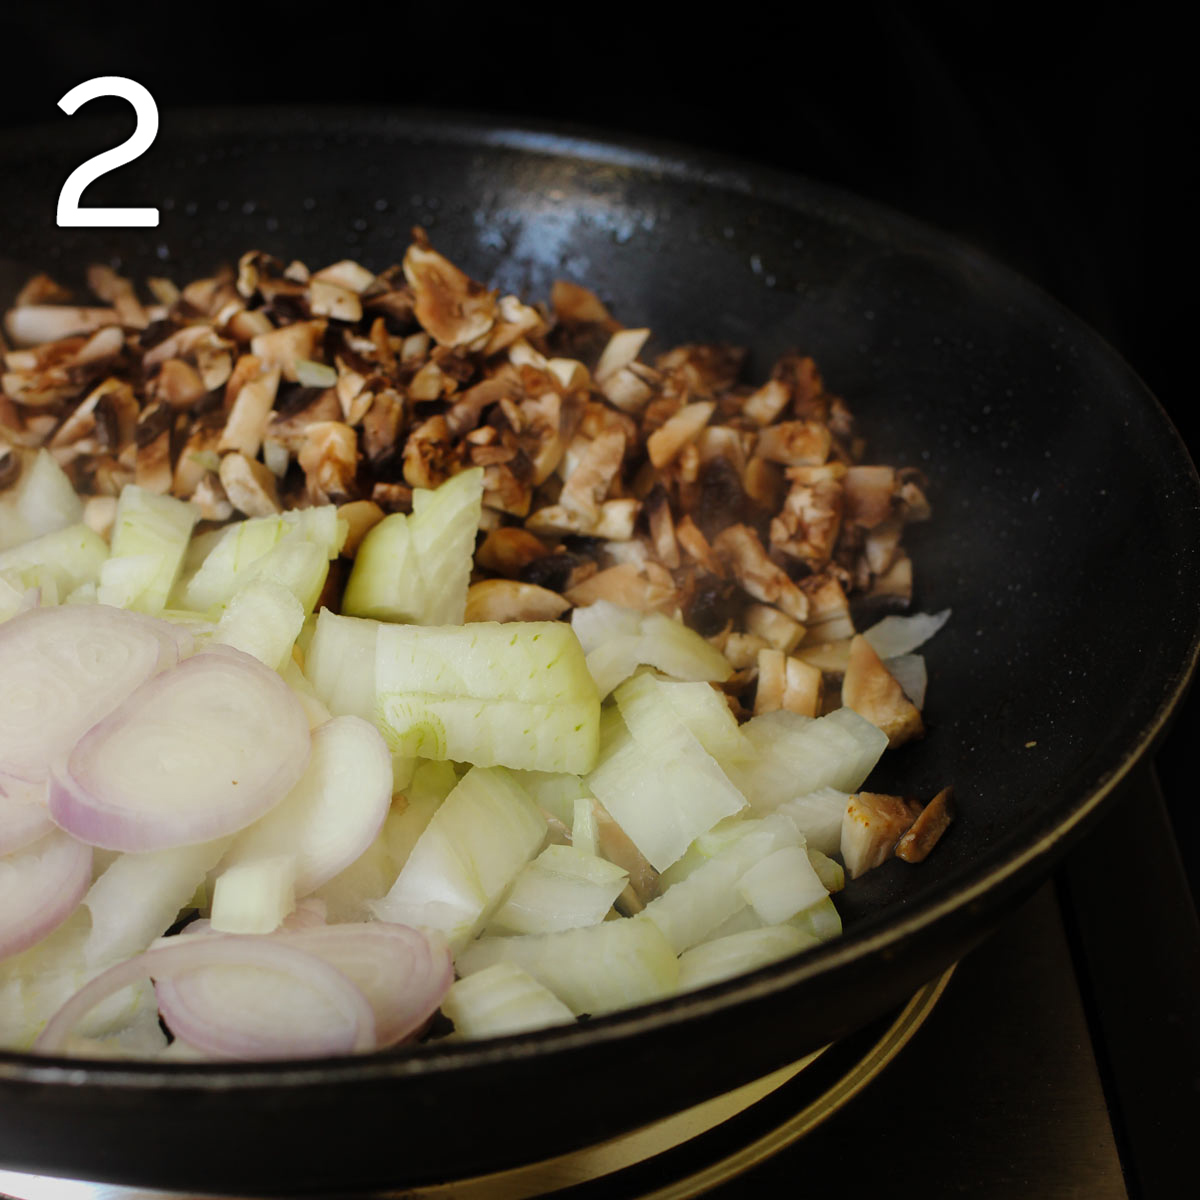 chopped onions, shallots, and mushrooms in skillet.